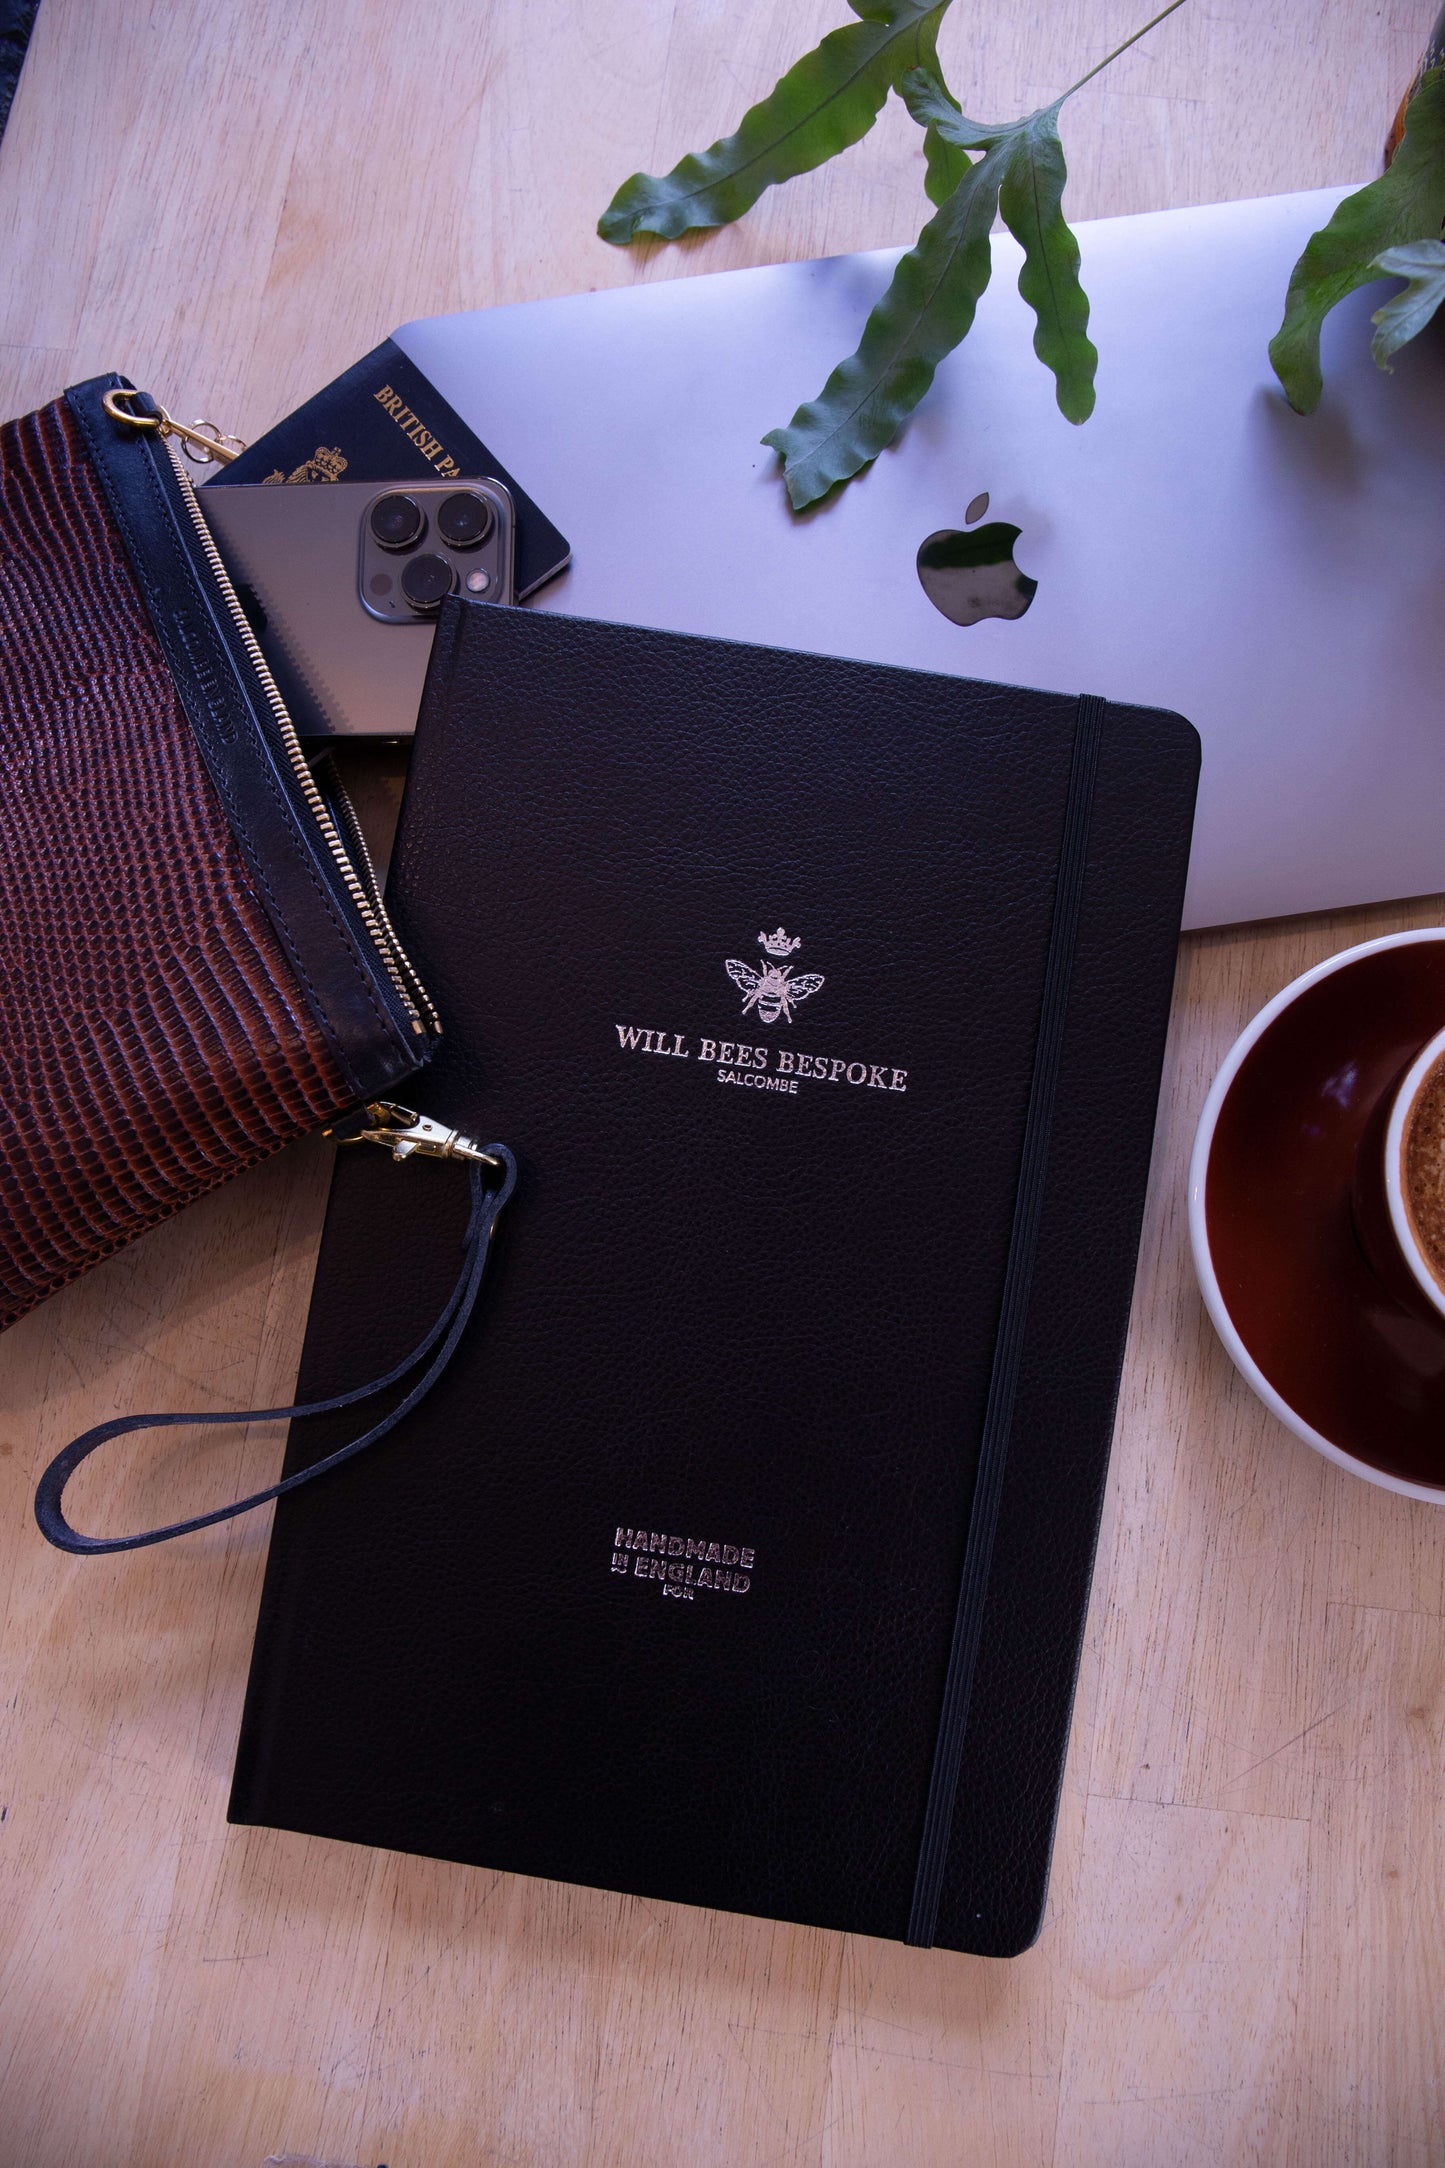 Crown Notebook - Recycled Leather in Black - Will Bees Bespoke